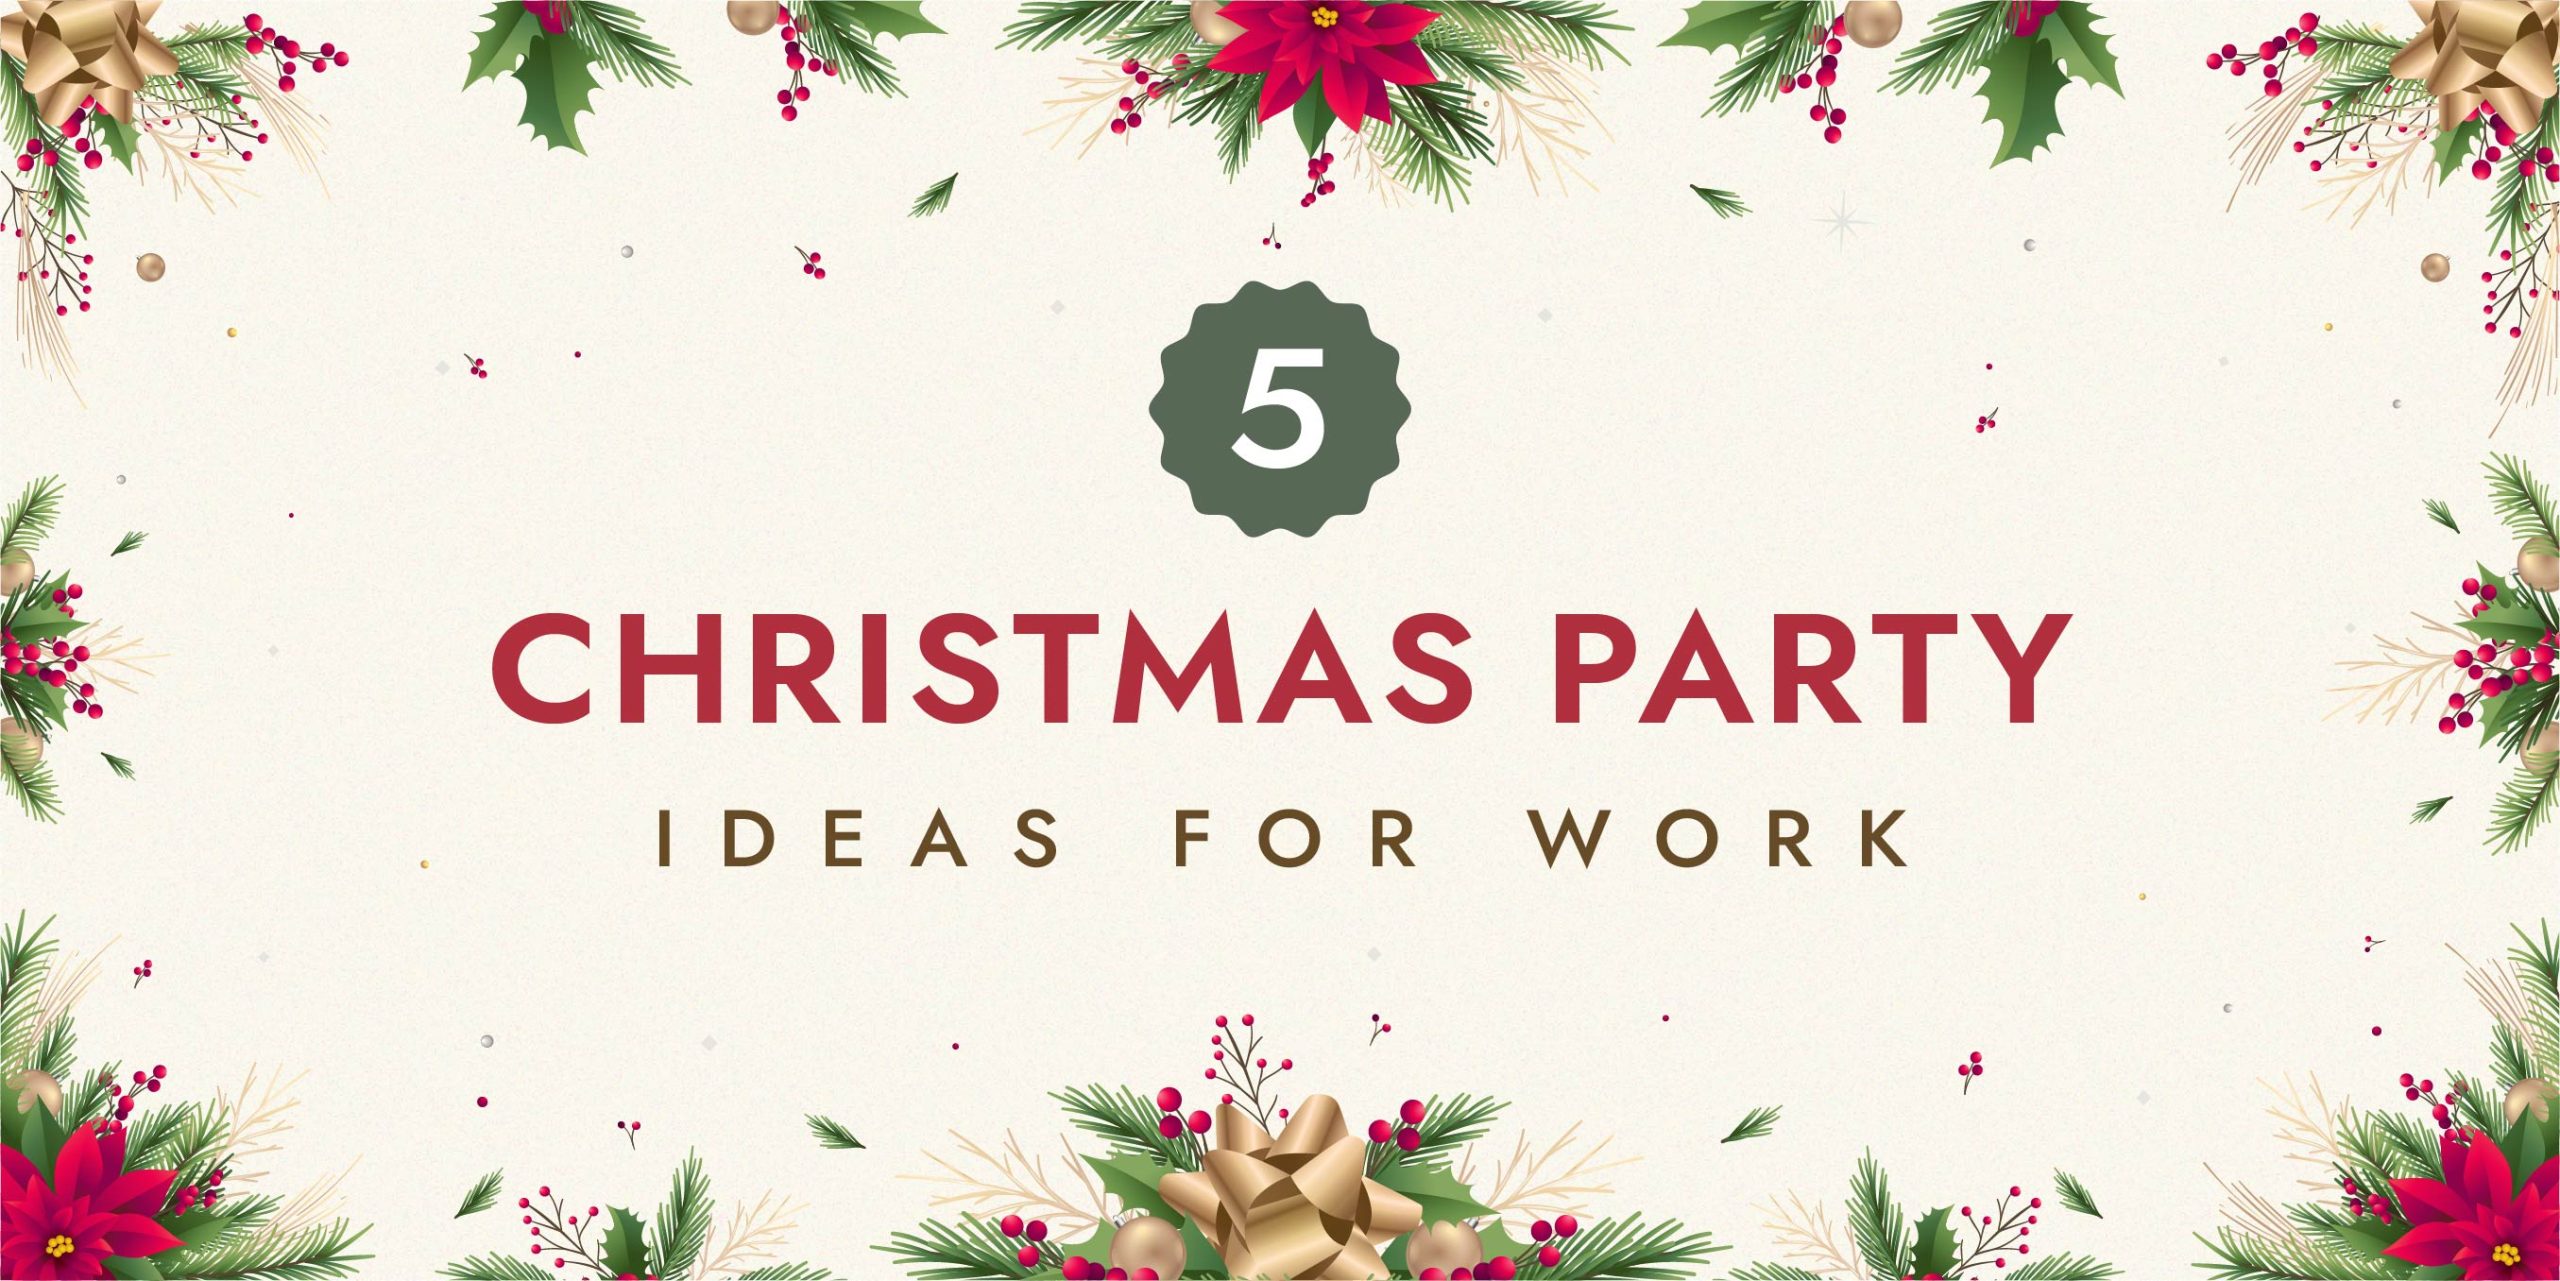 Christmas Party Ideas For Work